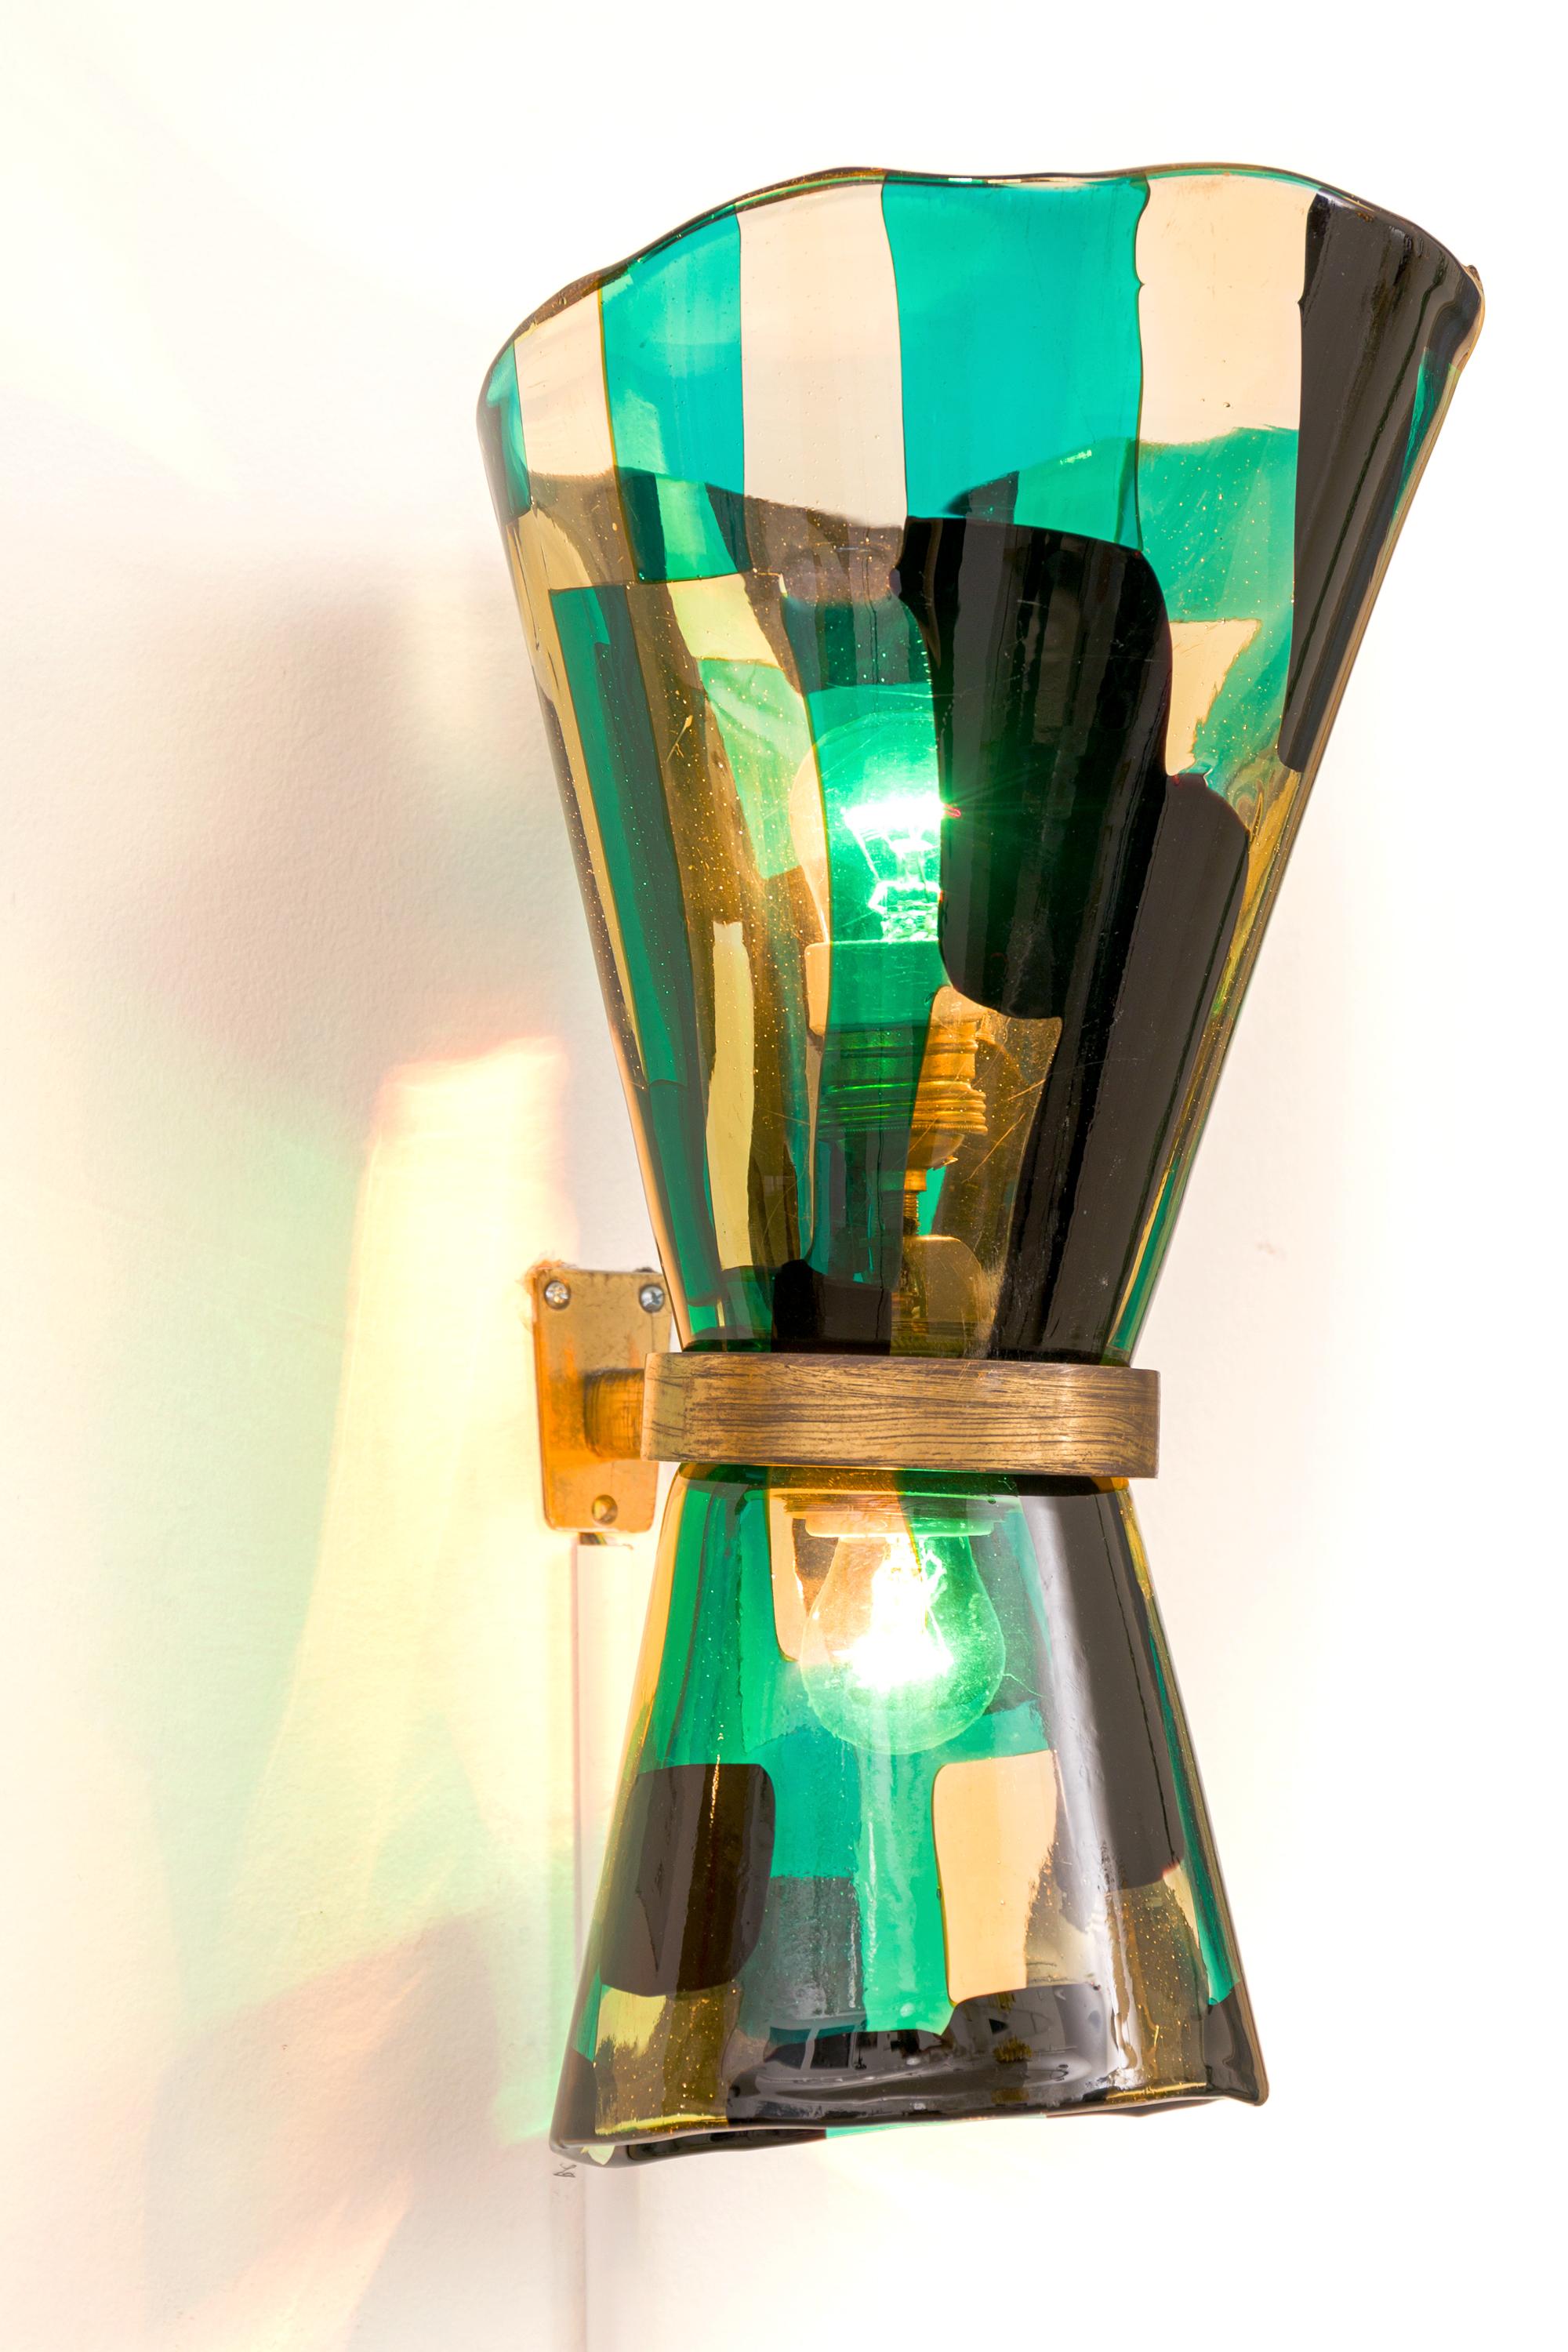 Pezzato glass was developed in the 1950s by Fulvio Bianconi for Venini & C. of Murano. The piece is covered with a patchwork of rectangles of different colors, heating the slices until the glass is soft and then picking them up and smoothing them to